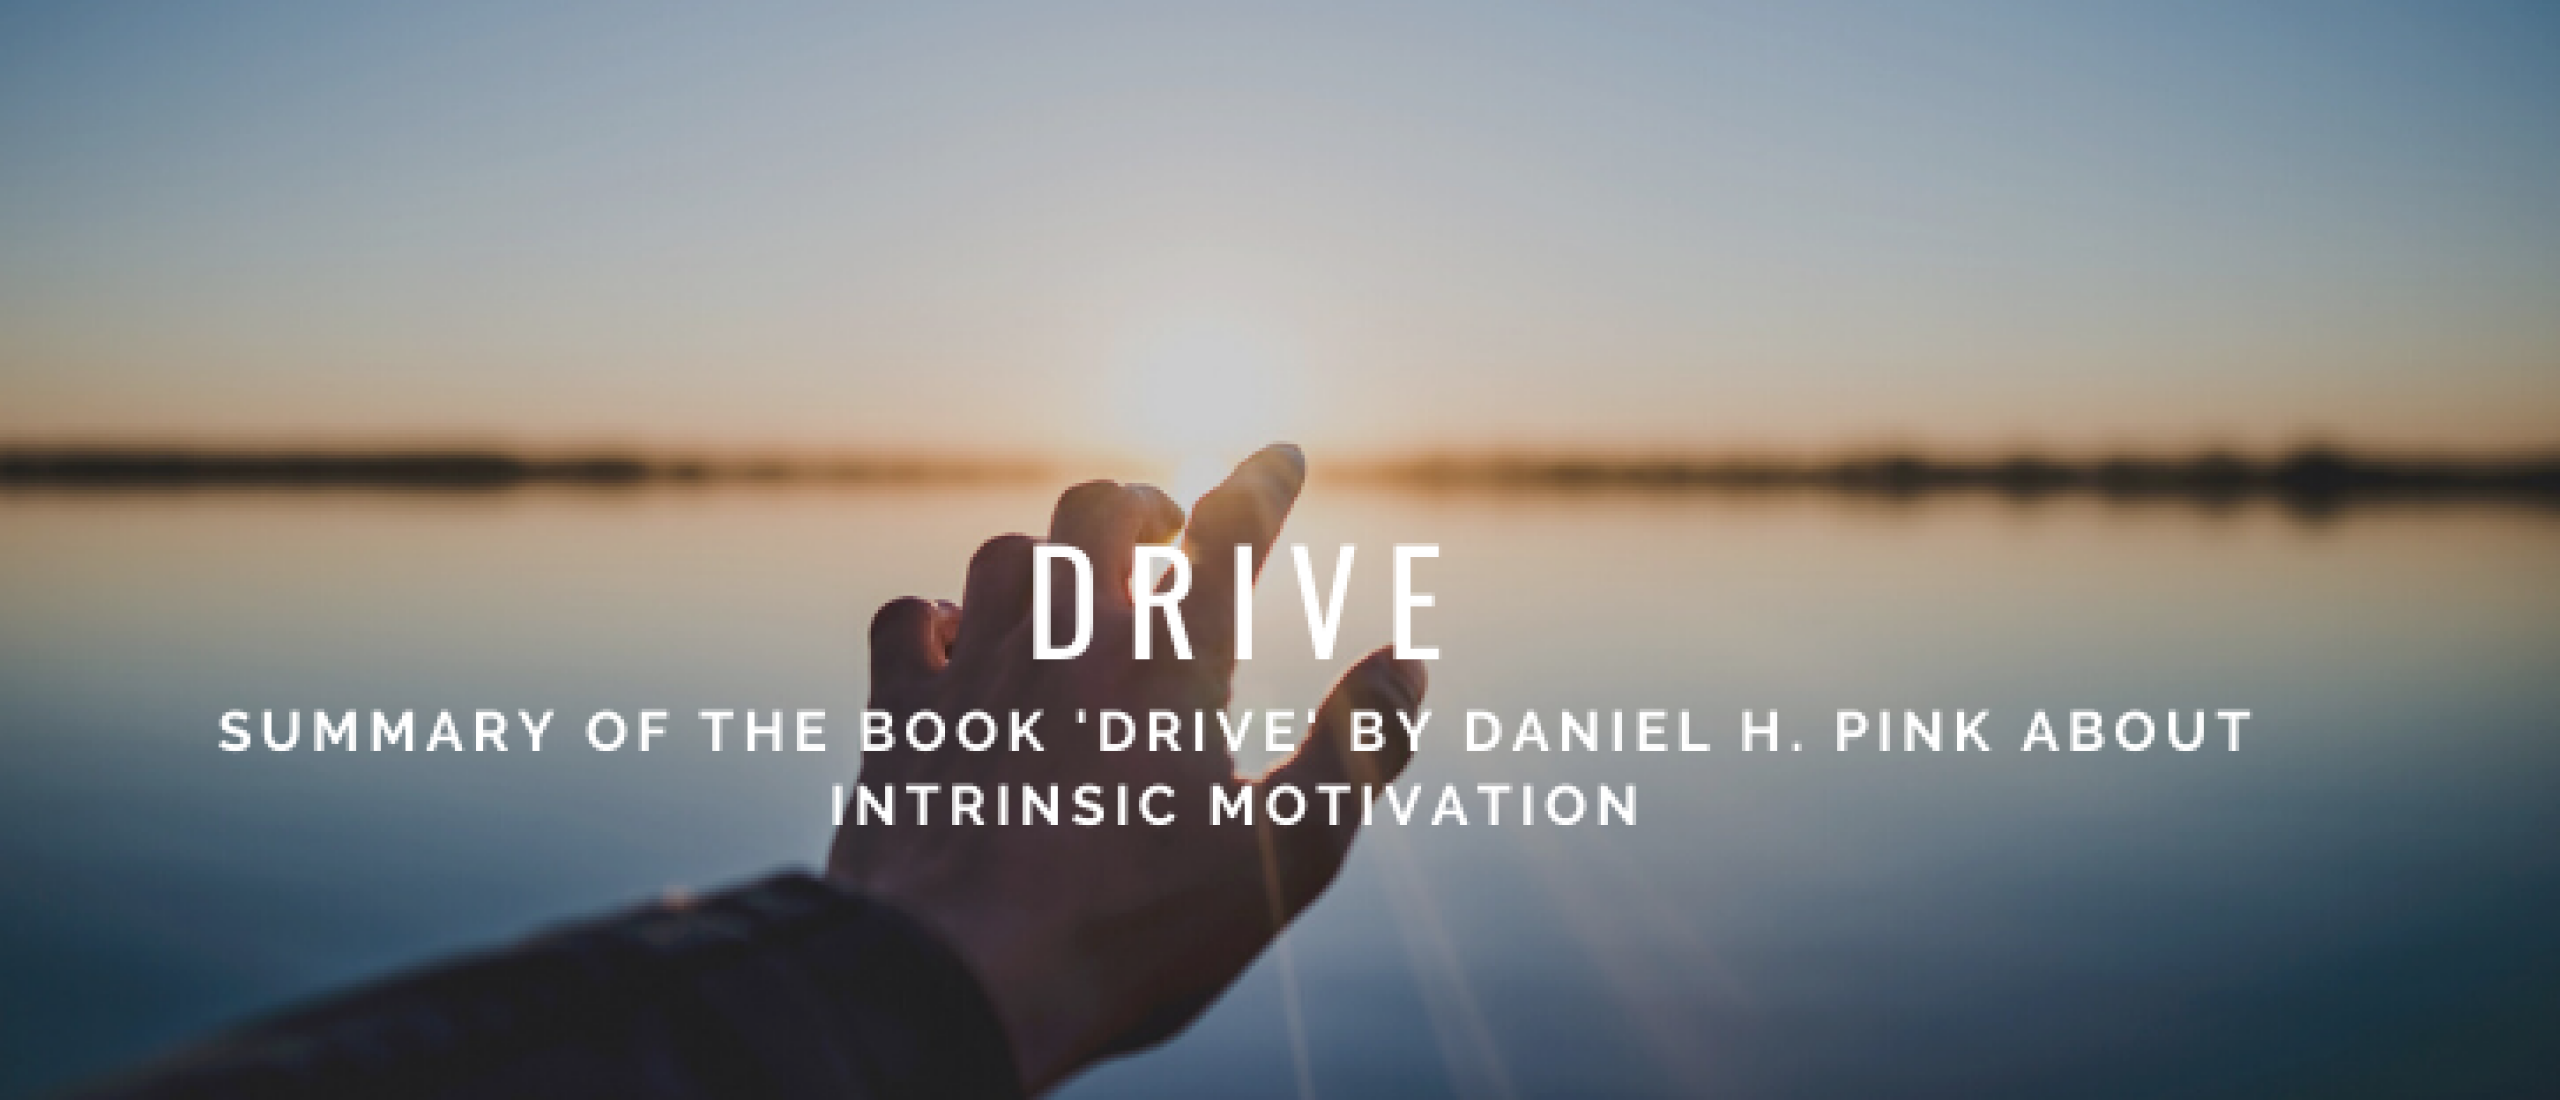 Summary Drive by Daniel H. Pink